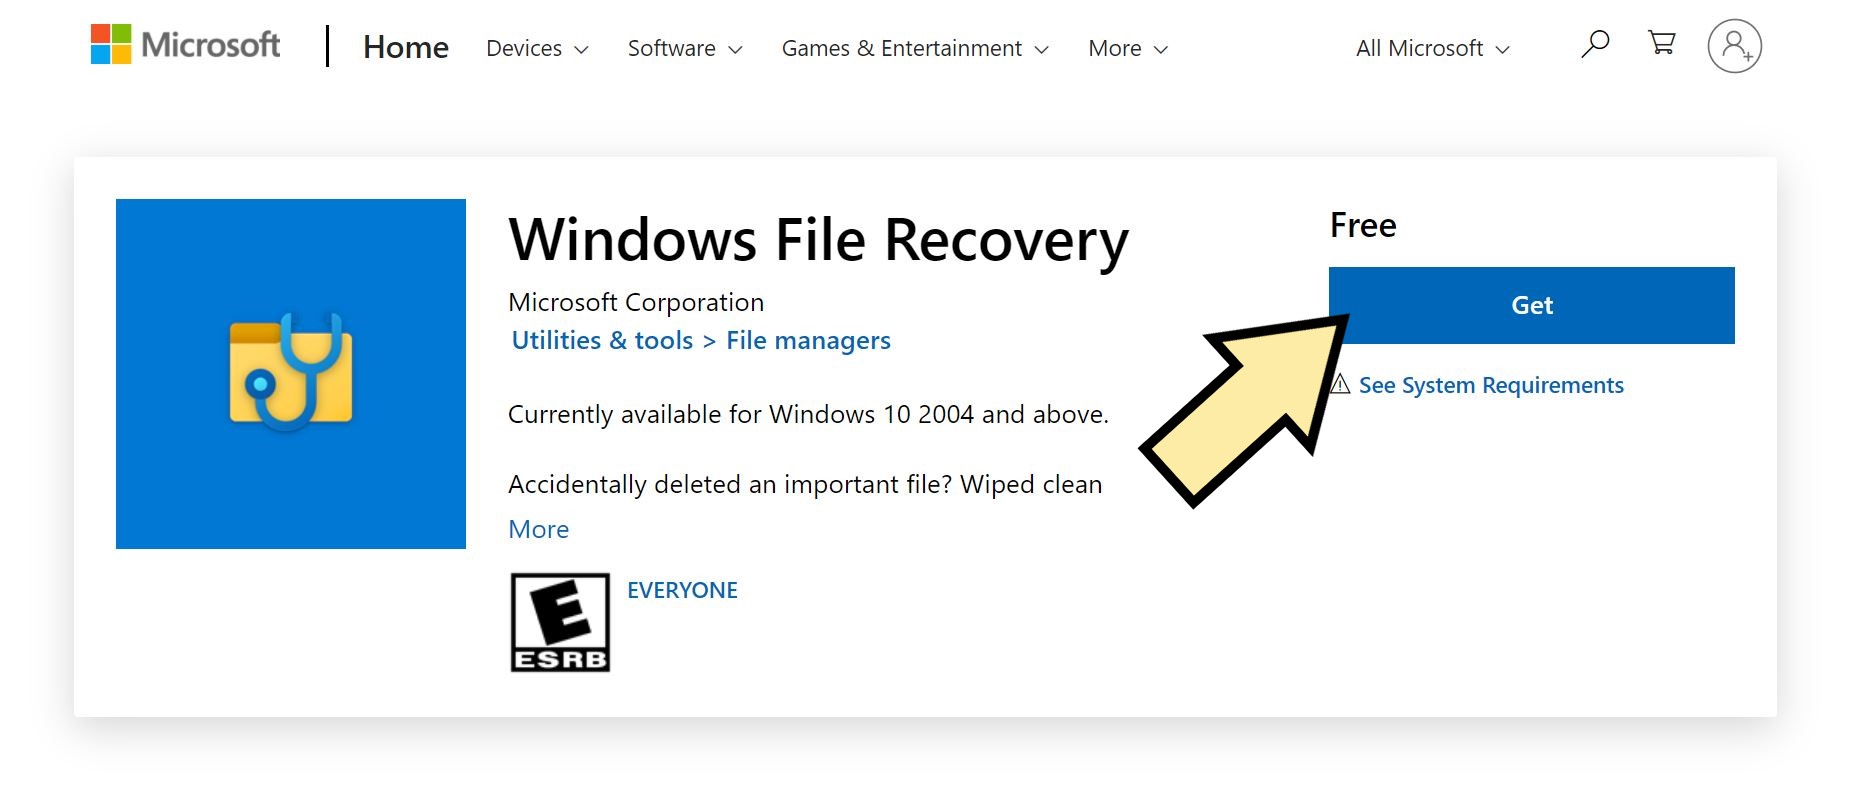 windows file recovery download page